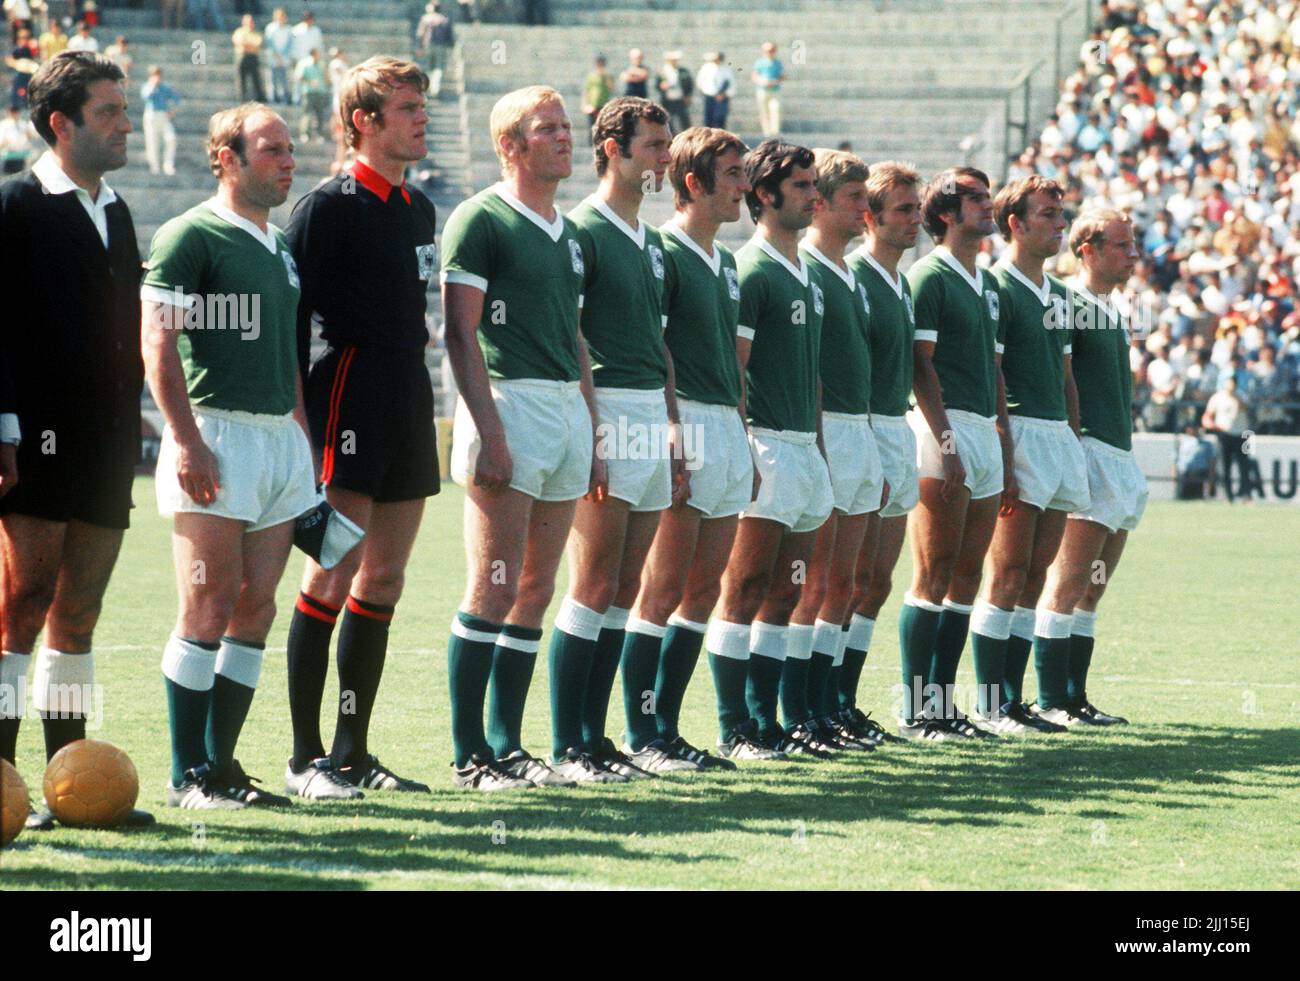 FILED - 10 June 1970, Mexico, Leon: The German national soccer team lines up for the anthems (2nd from left to right) at Guanajuato Stadium before their group match at the World Cup in Mexico against Peru (3:1): Uwe Seeler, Sepp Maier, Karl-Heinz Schnellinger, Franz Beckenbauer, Hannes Löhr, Gerd Müller, Klaus Fichtel, Reinhard Libuda, Wolfgang Overath, Horst-Dieter Höttges, Berti Vogts. Seeler died on Thursday (21.07.2022) at the age of 85, as confirmed by his former club Hamburger SV, citing Seeler's family. Photo: Lothar Heidtmann/dpa Stock Photo